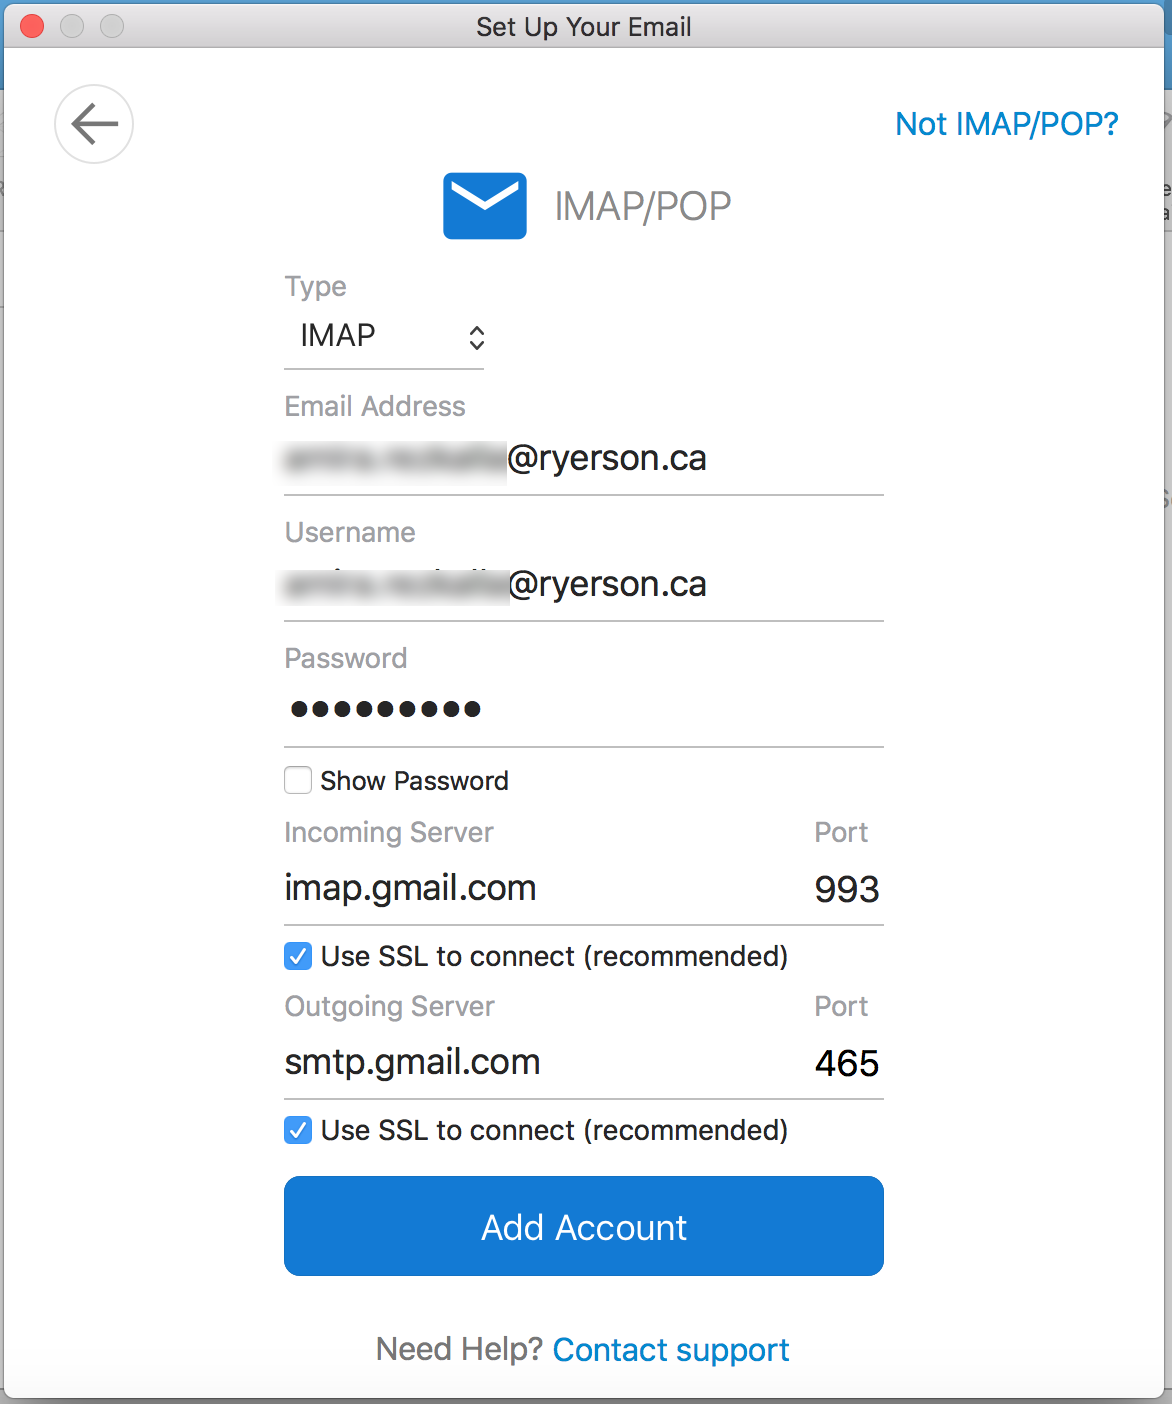 Set up Your Email with IMAP screen